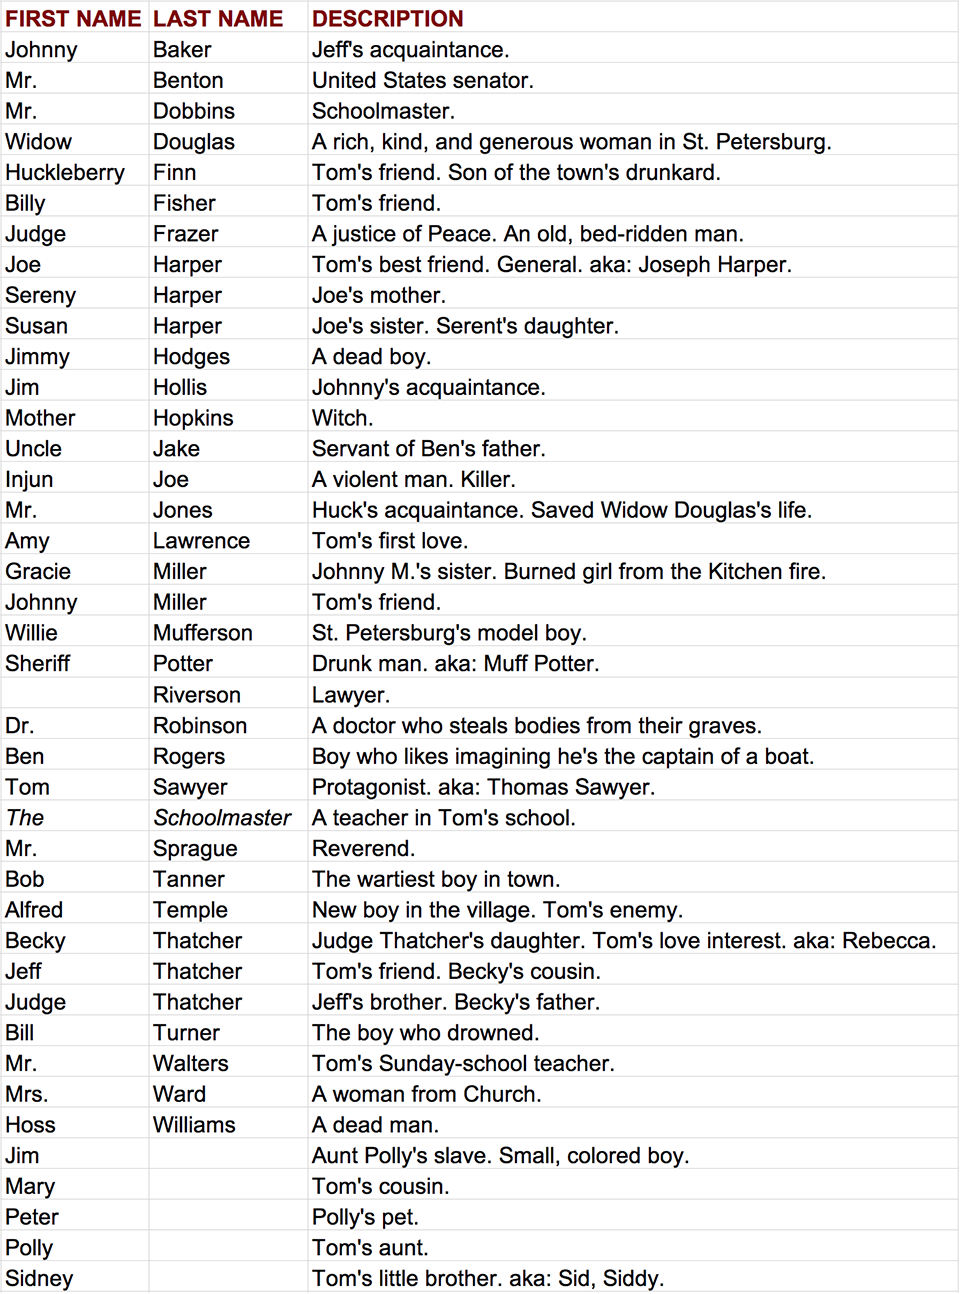 The Adventures of Tom Sawyer Characters Alphabetically Listed